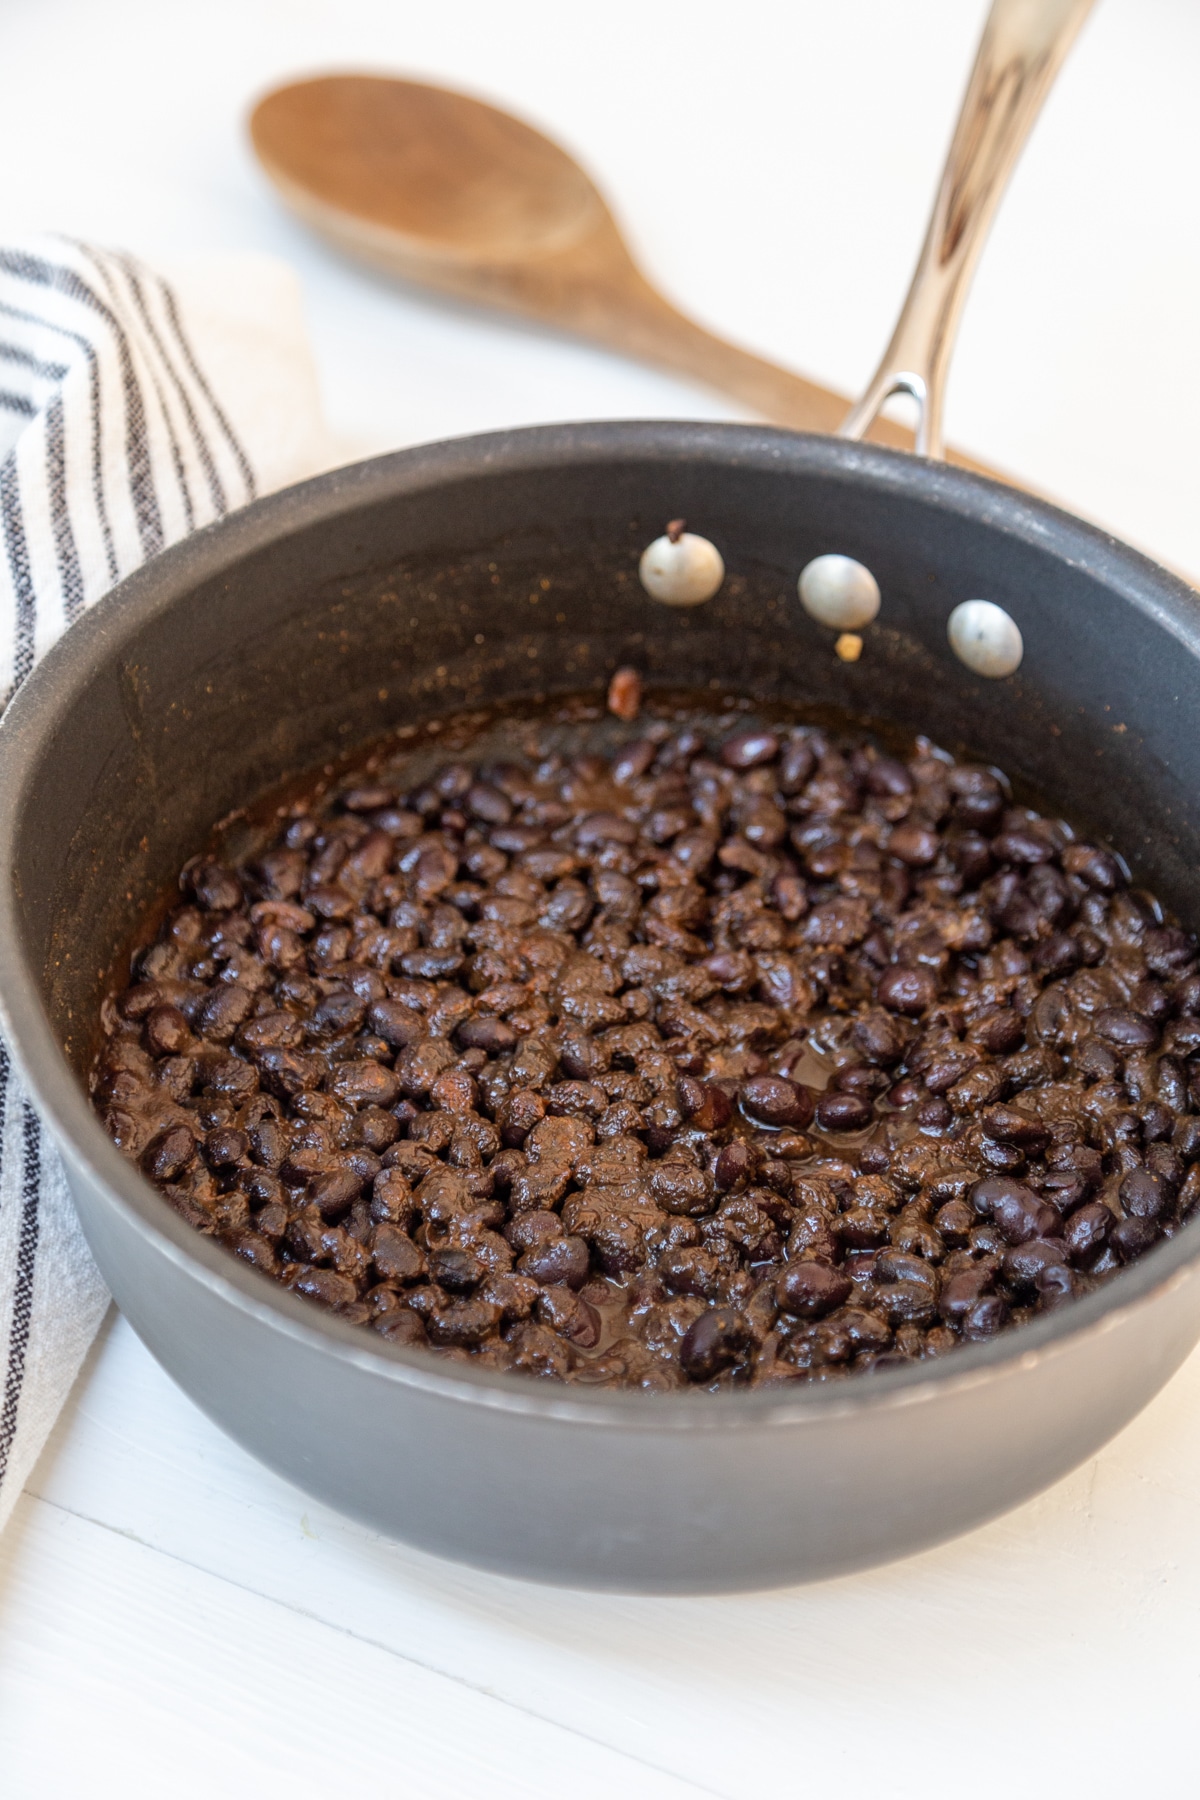 A pot of black beans with a wooden spoon and a black and white striped towel in the background.